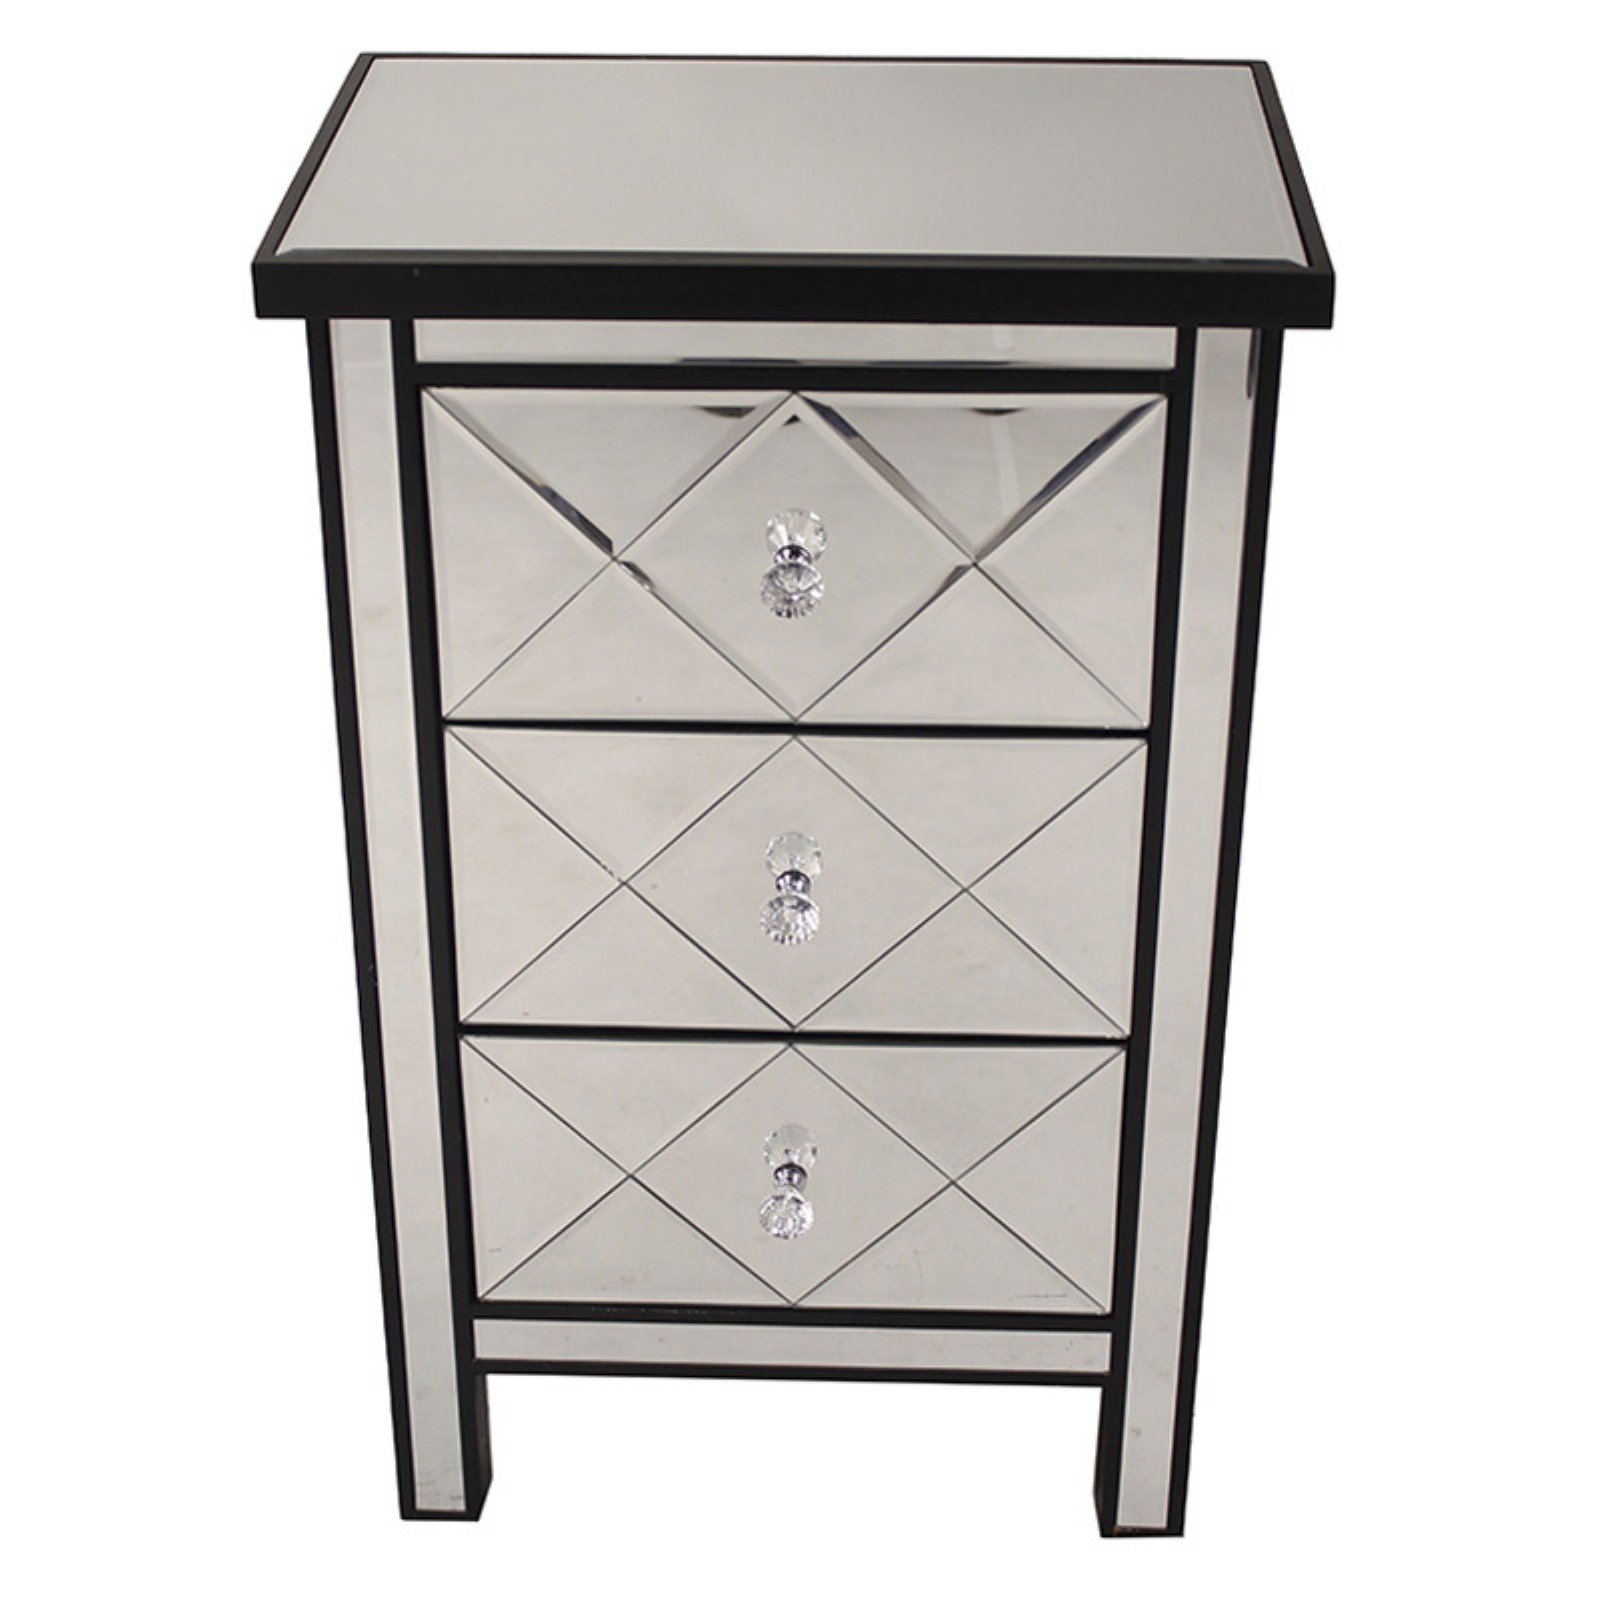 Heather Ann Creations Emmy 3 Drawer Mirrored Accent Cabinet - image 3 of 7